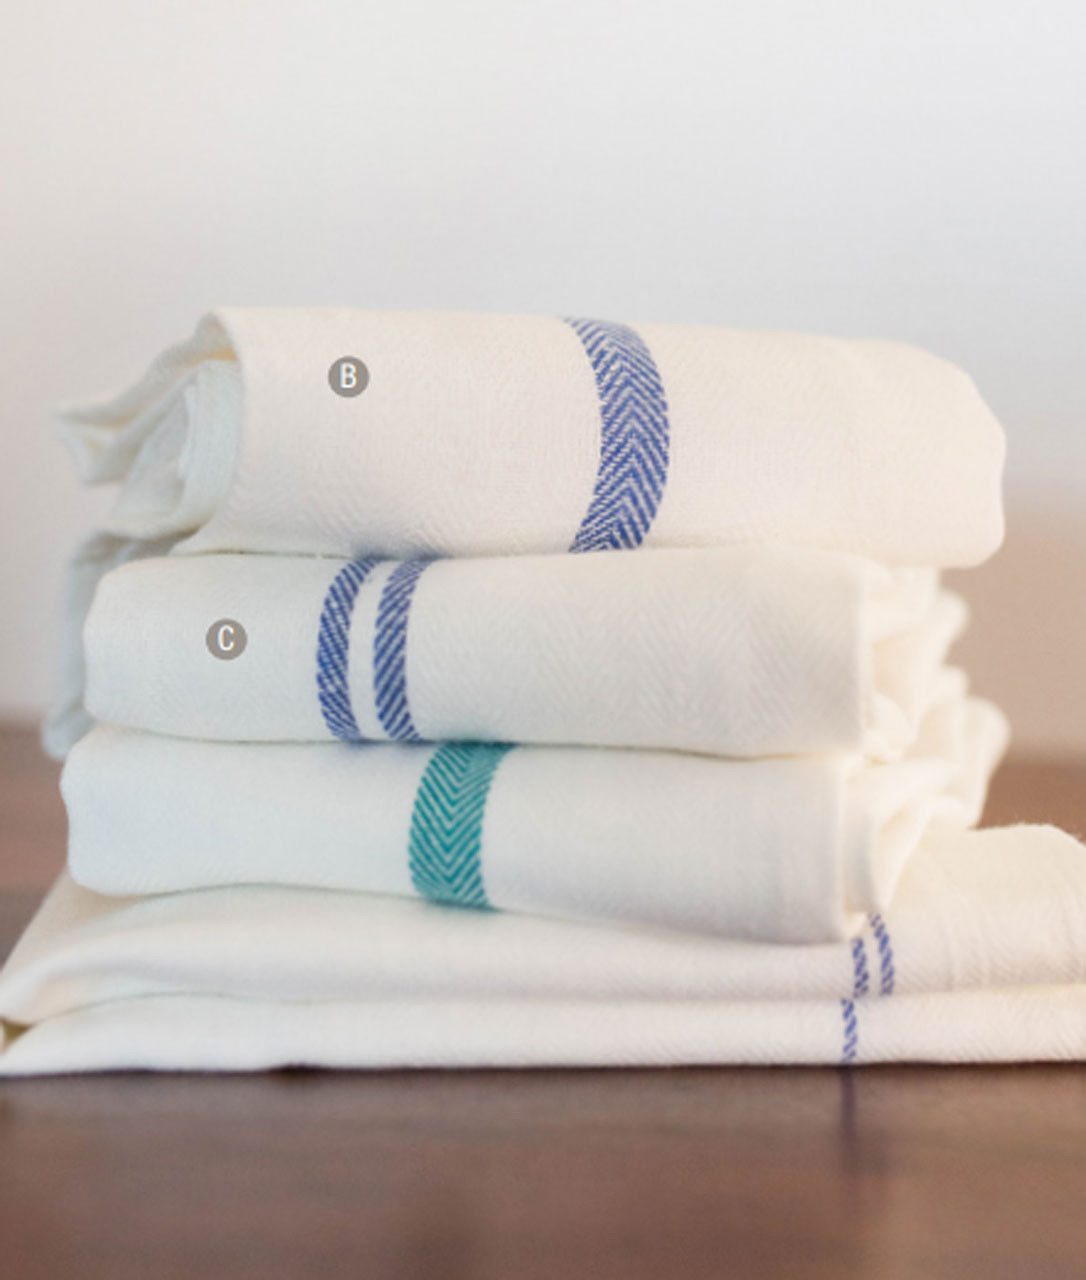 Where will my 100 percent cotton kitchen towels ship from?